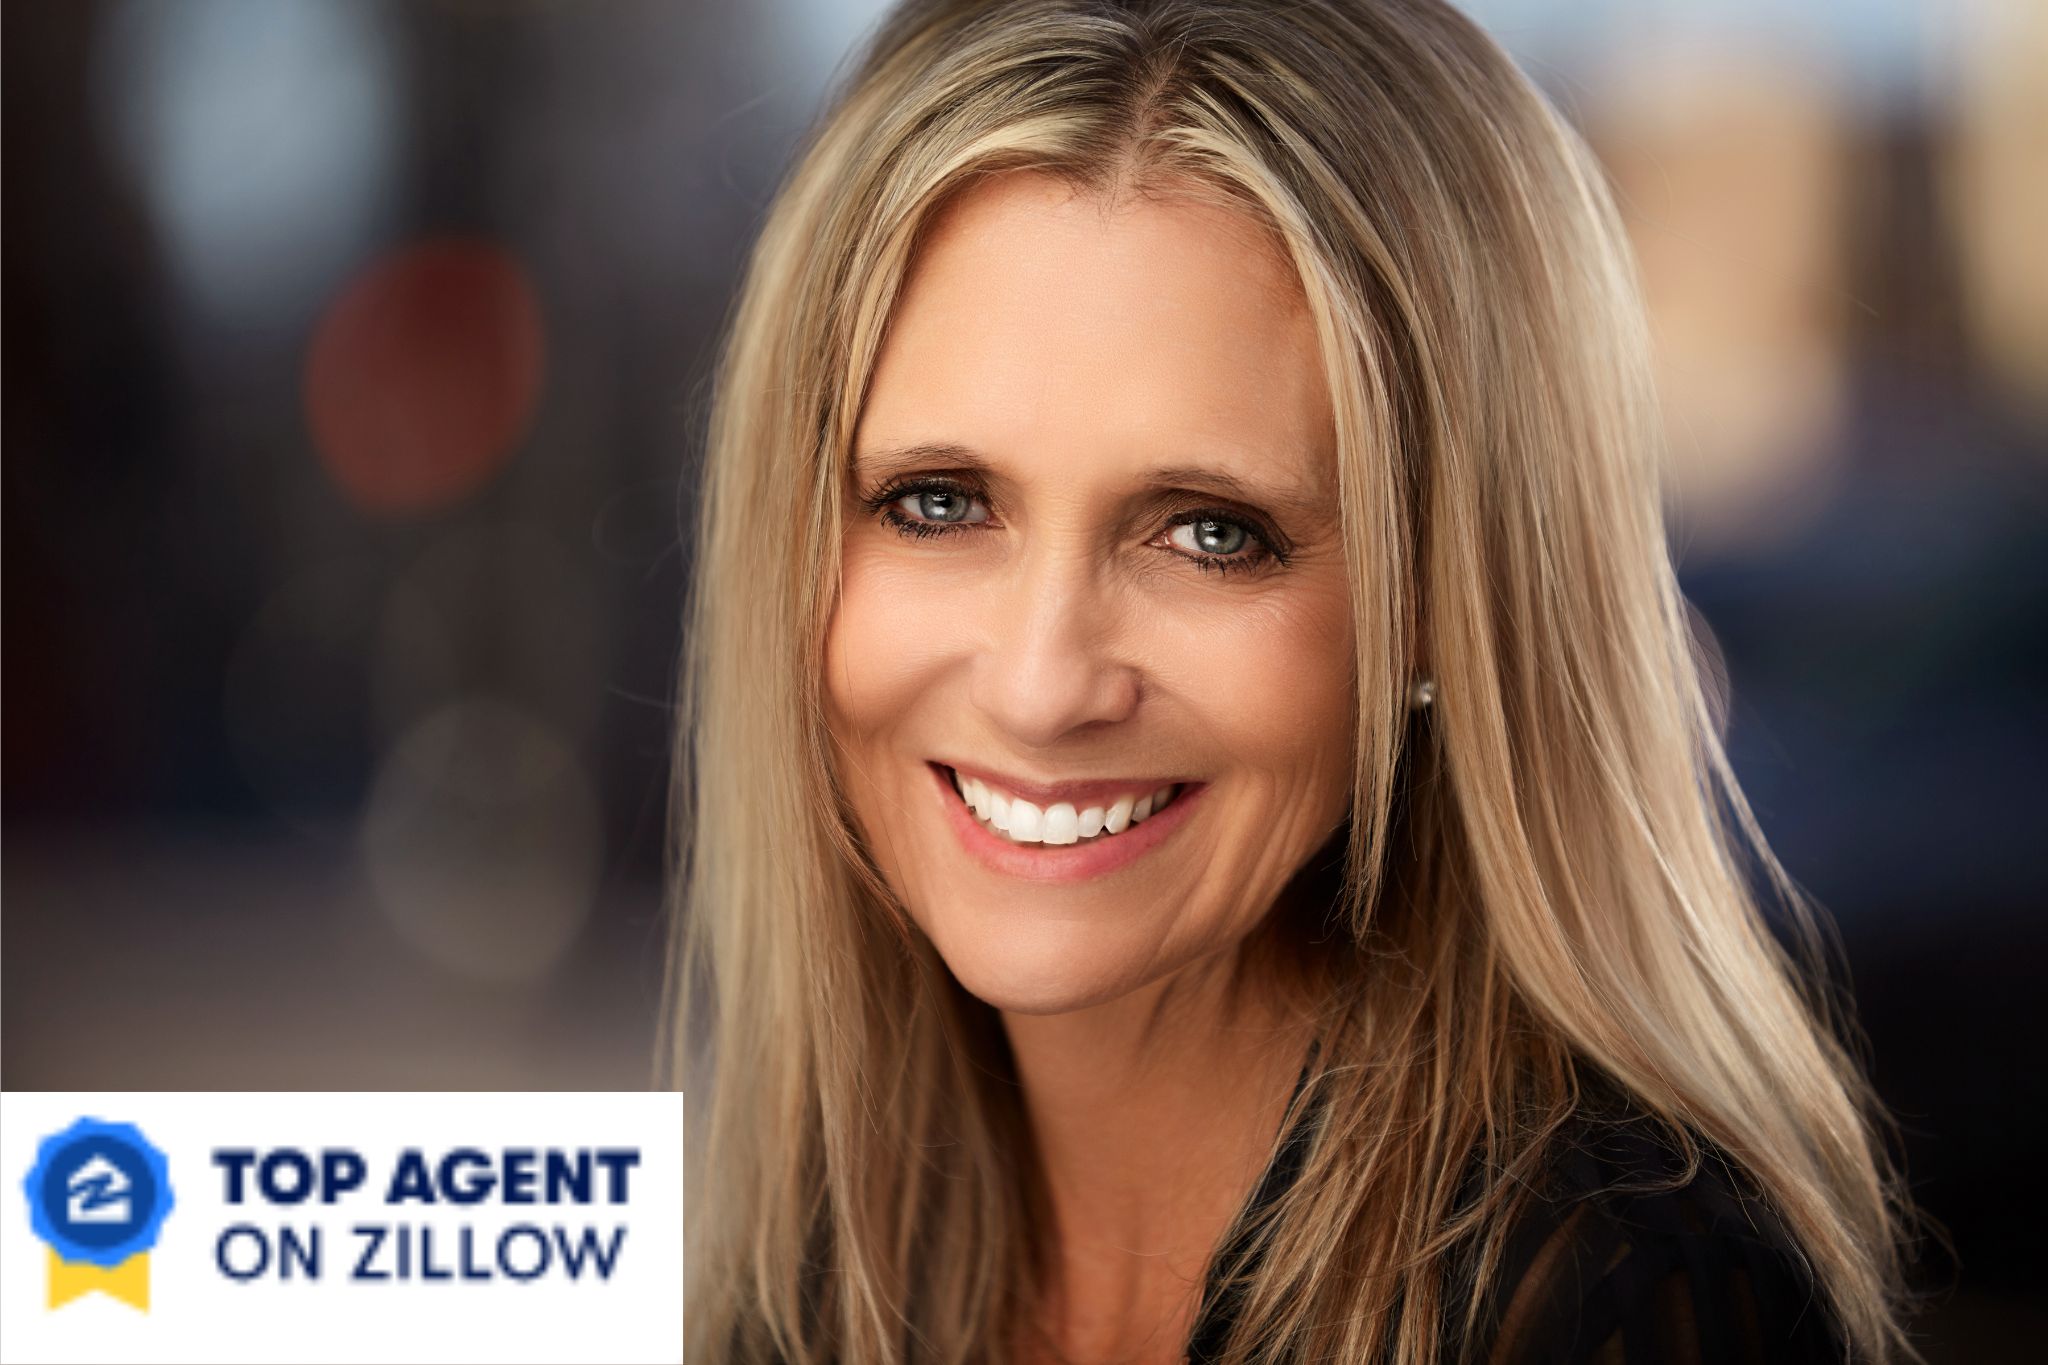 Full Service Listing with a Top Agent on Zillow icon